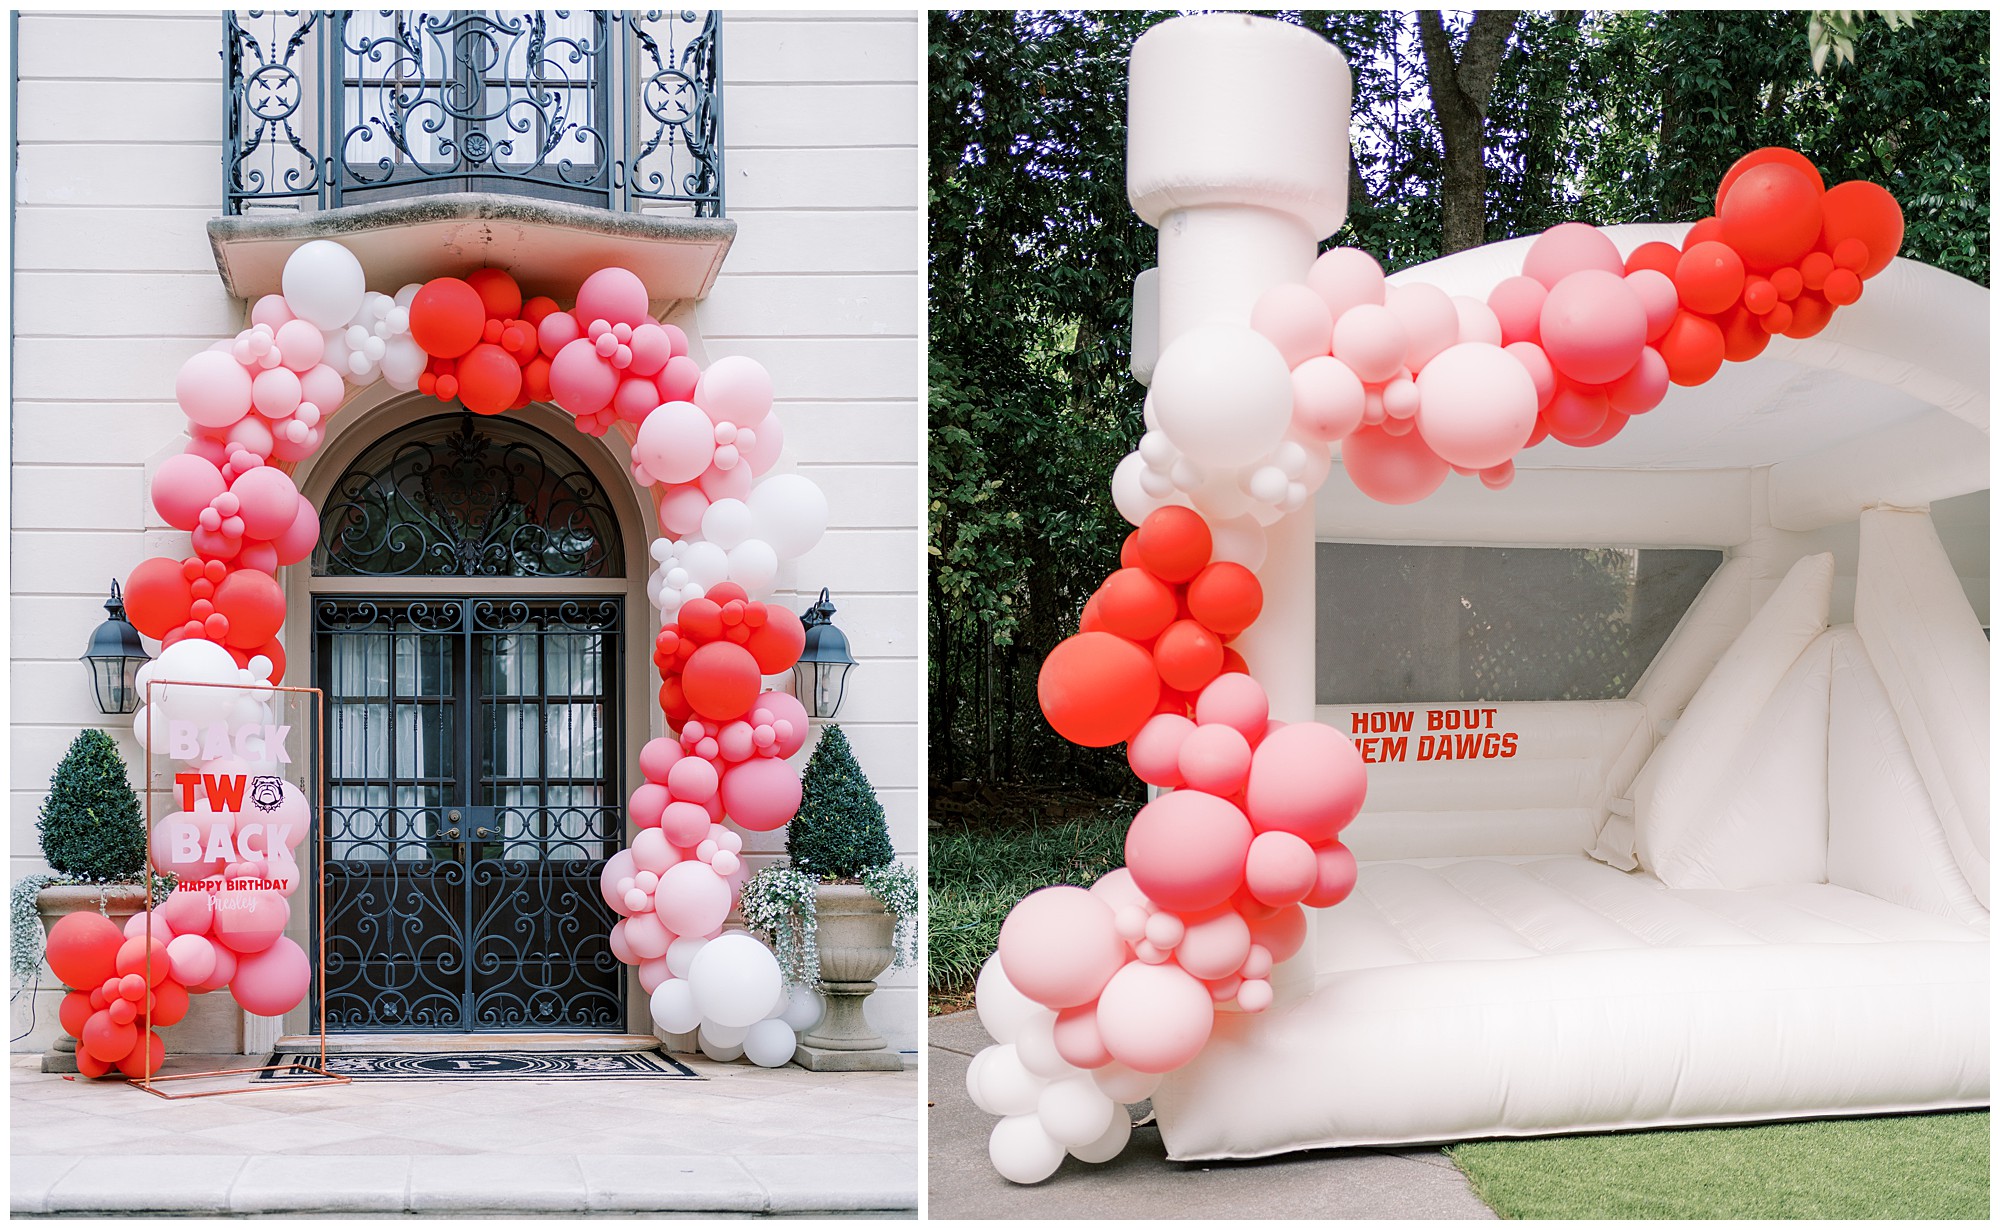 A red and white balloon arch around a door and a white bouncy castle for a two year old's University of Georgia birthday party.